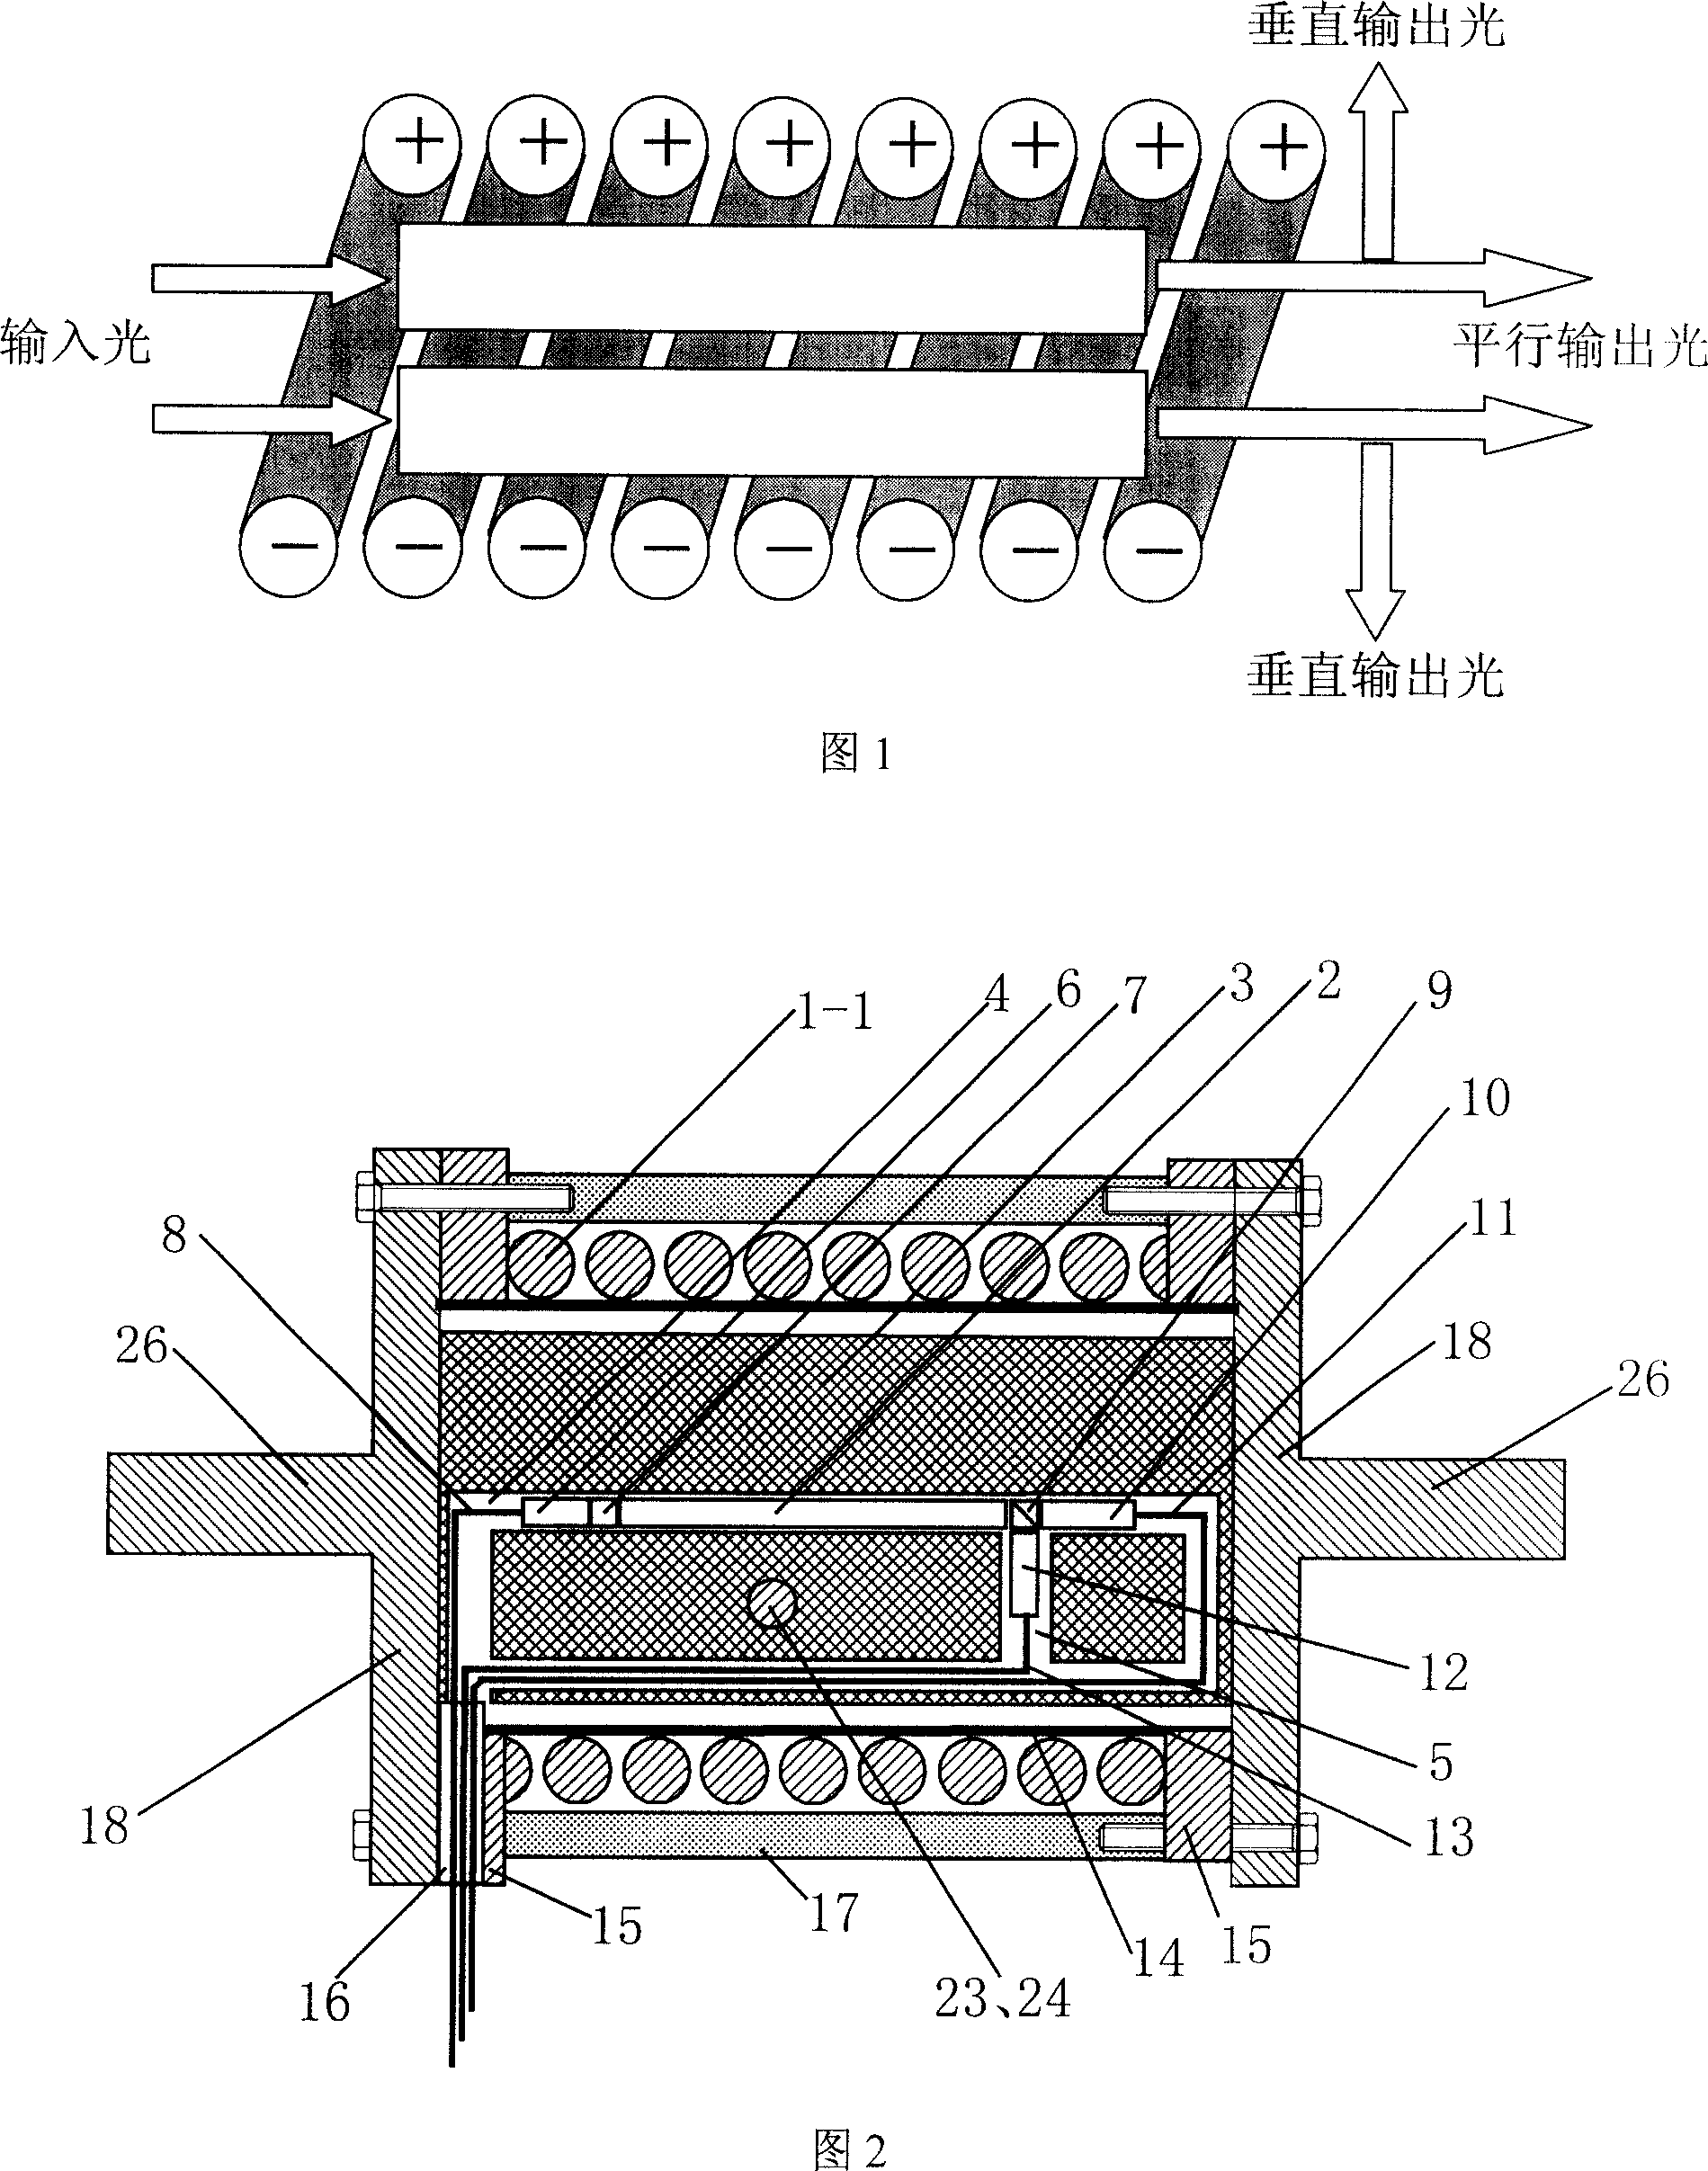 Optical current transformer and method for measuring current with the same